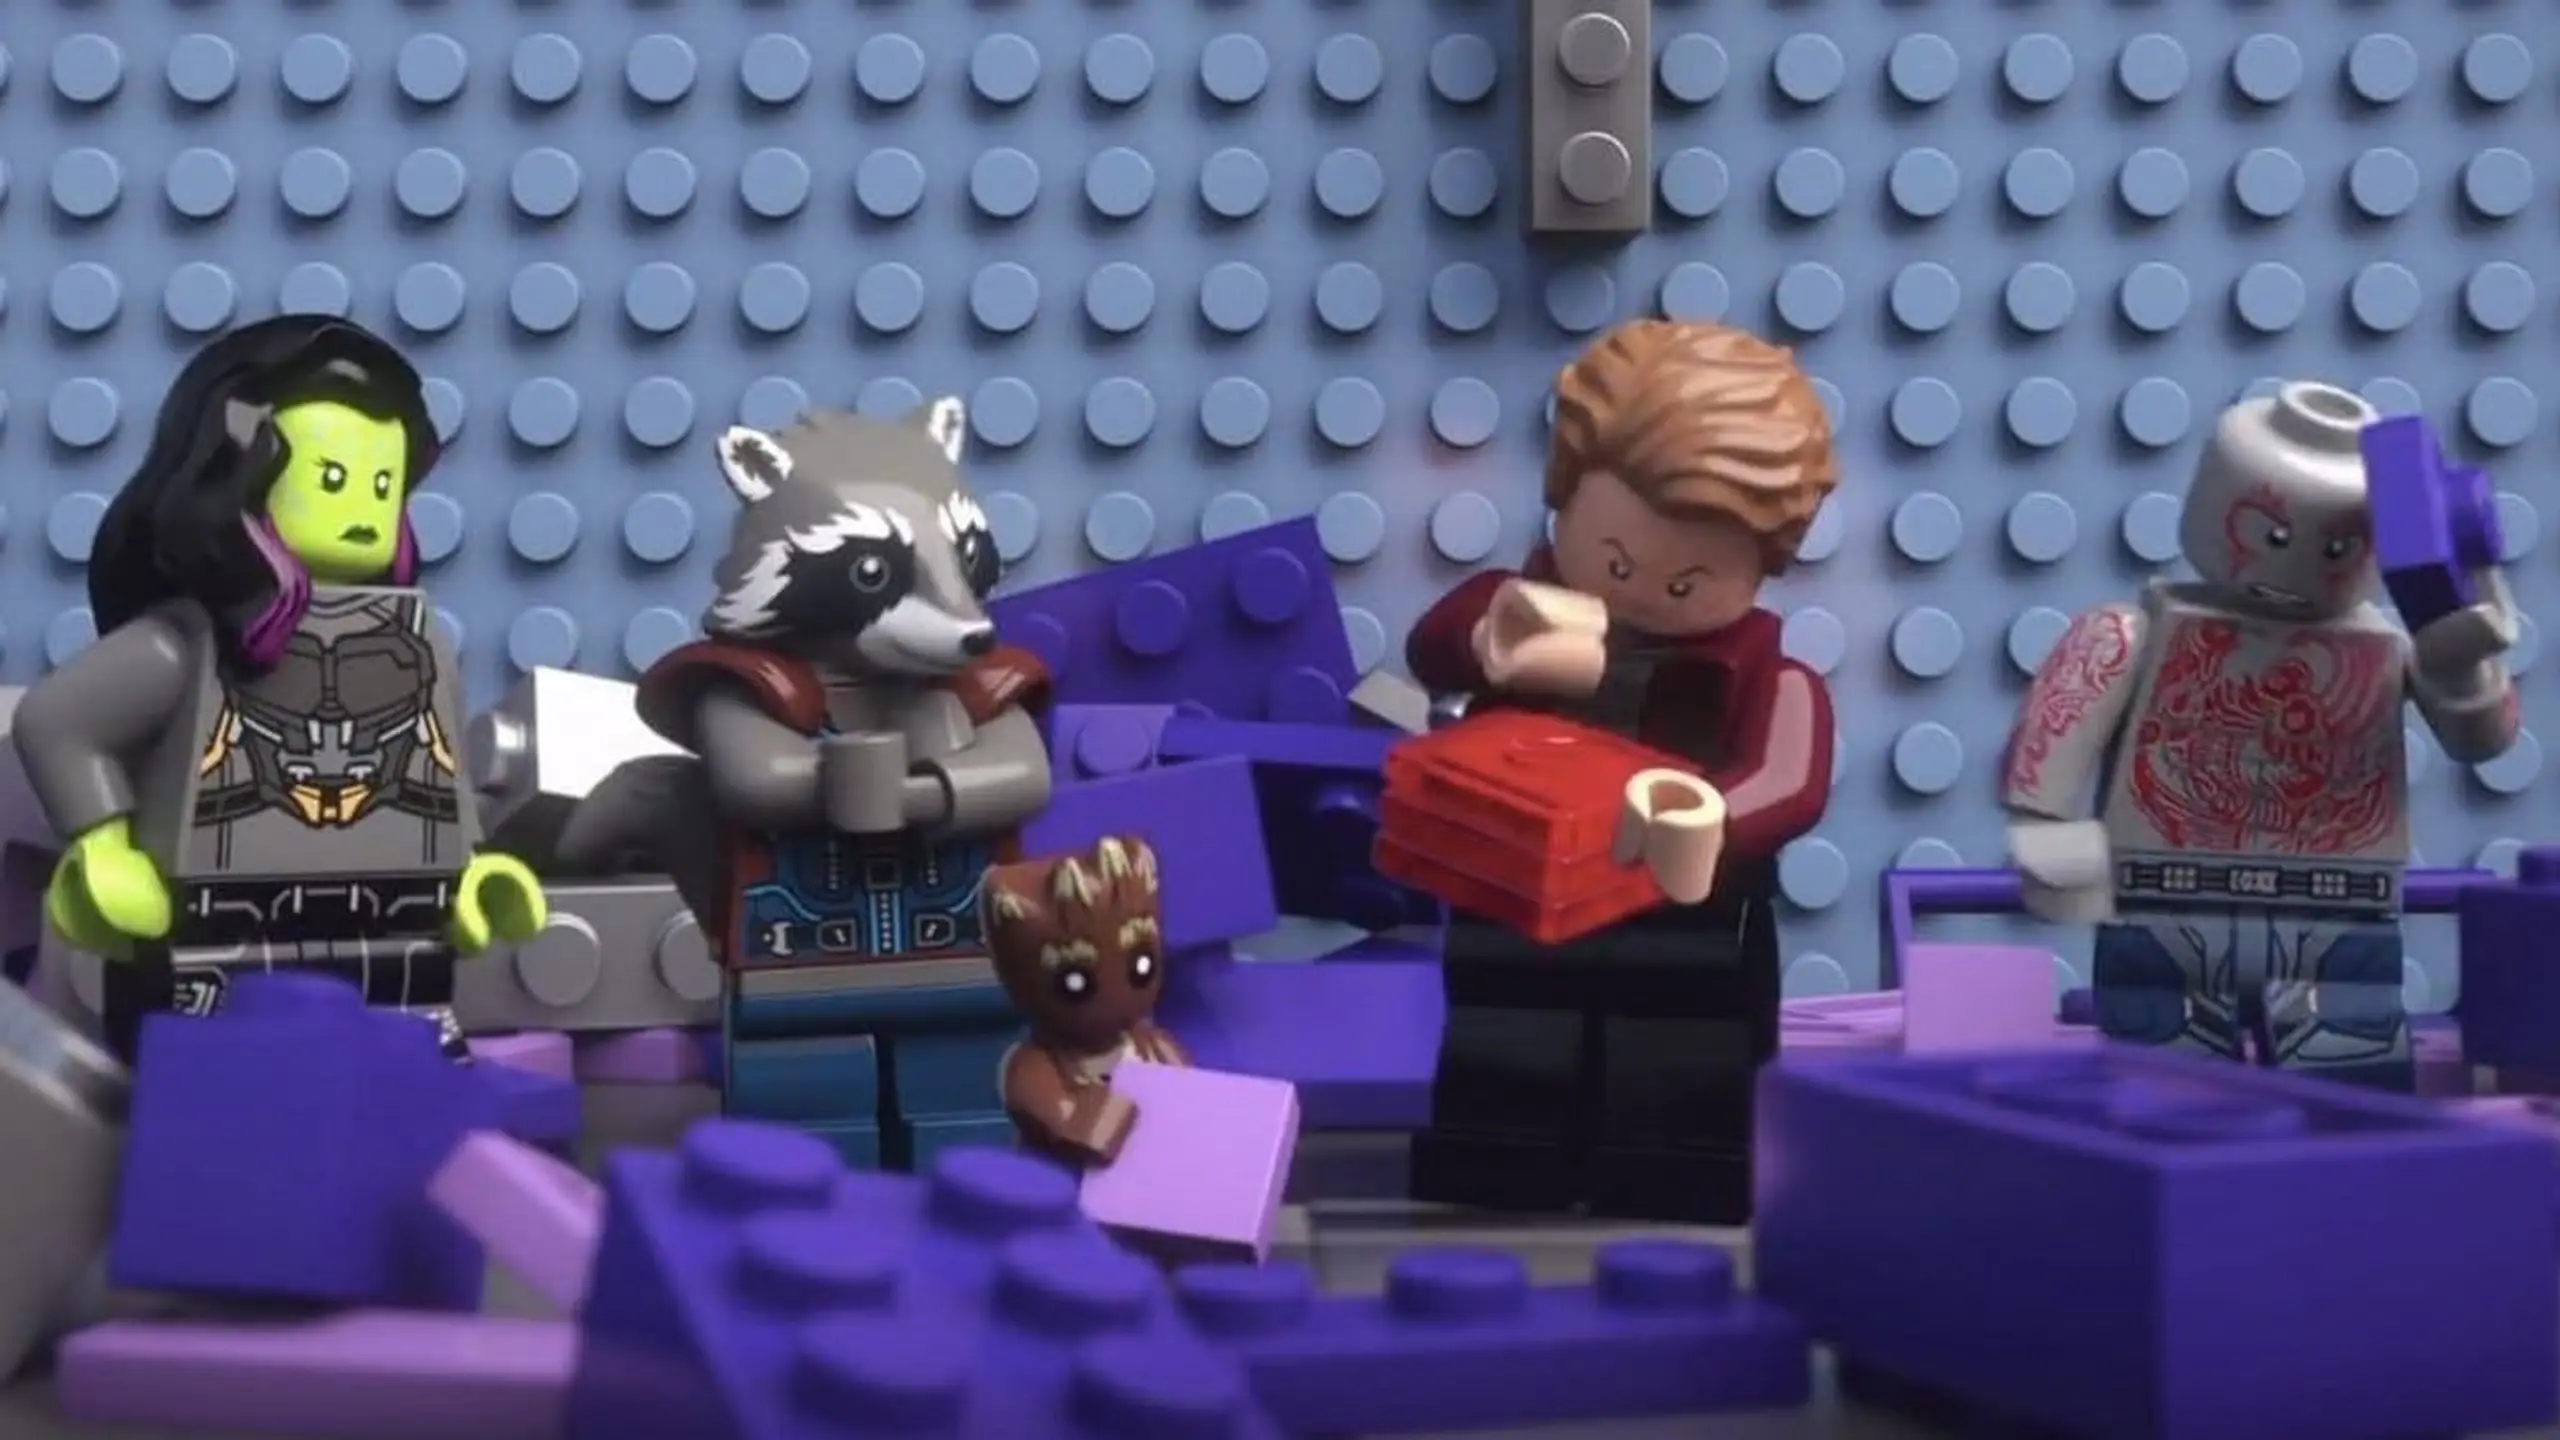 LEGO Marvel Super Heroes: Guardians of the Galaxy - Die Thanos Bedrohung